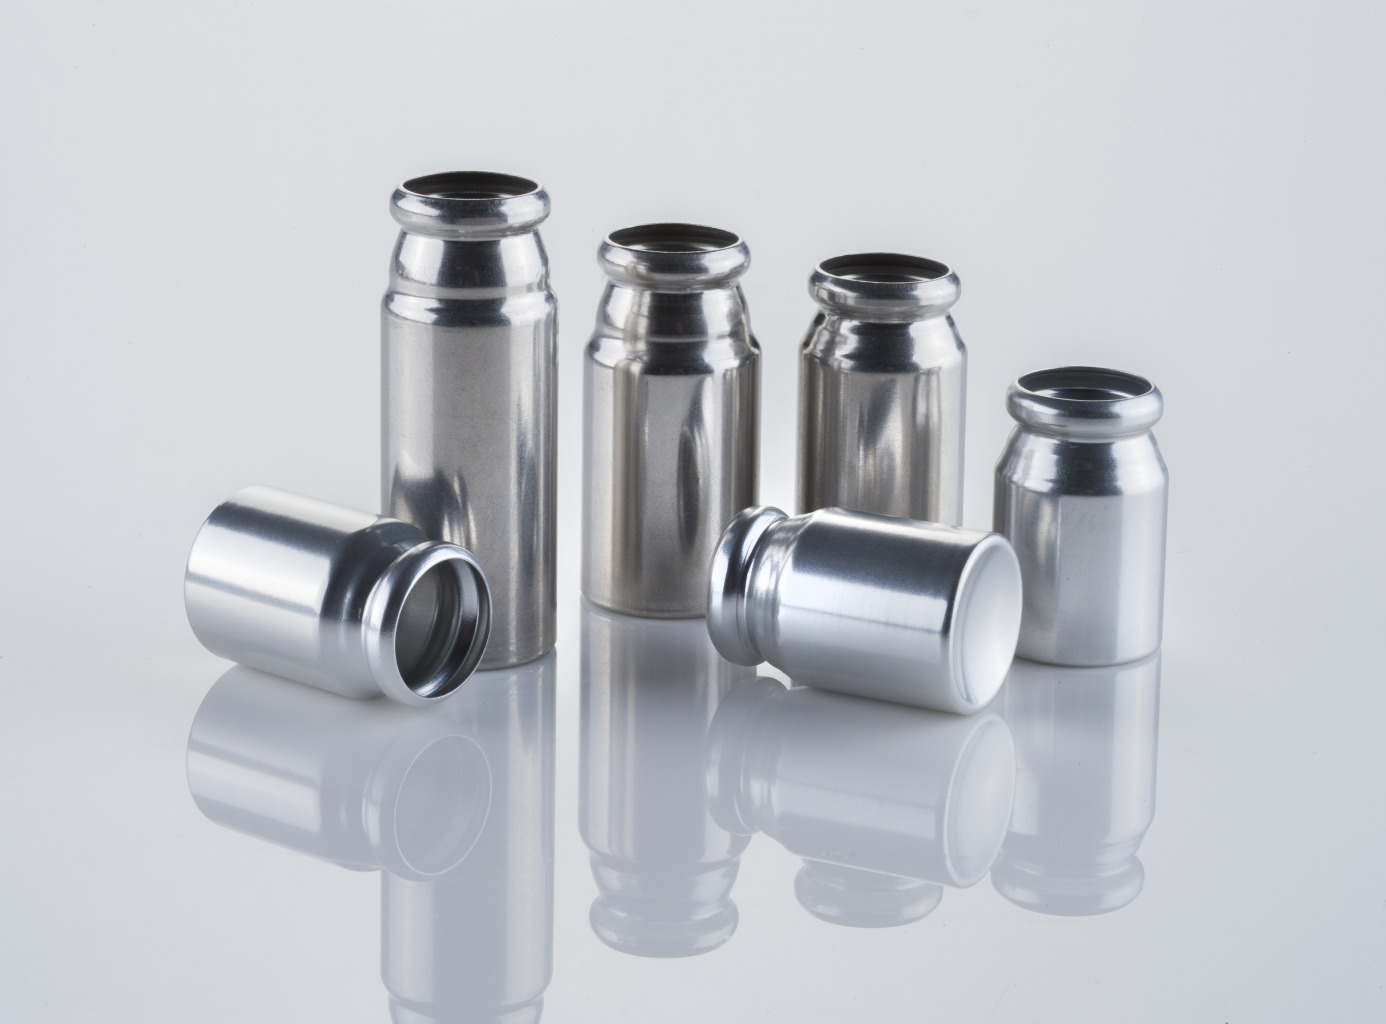 Metered Dose Inhaler Canisters (MDI Canisters)